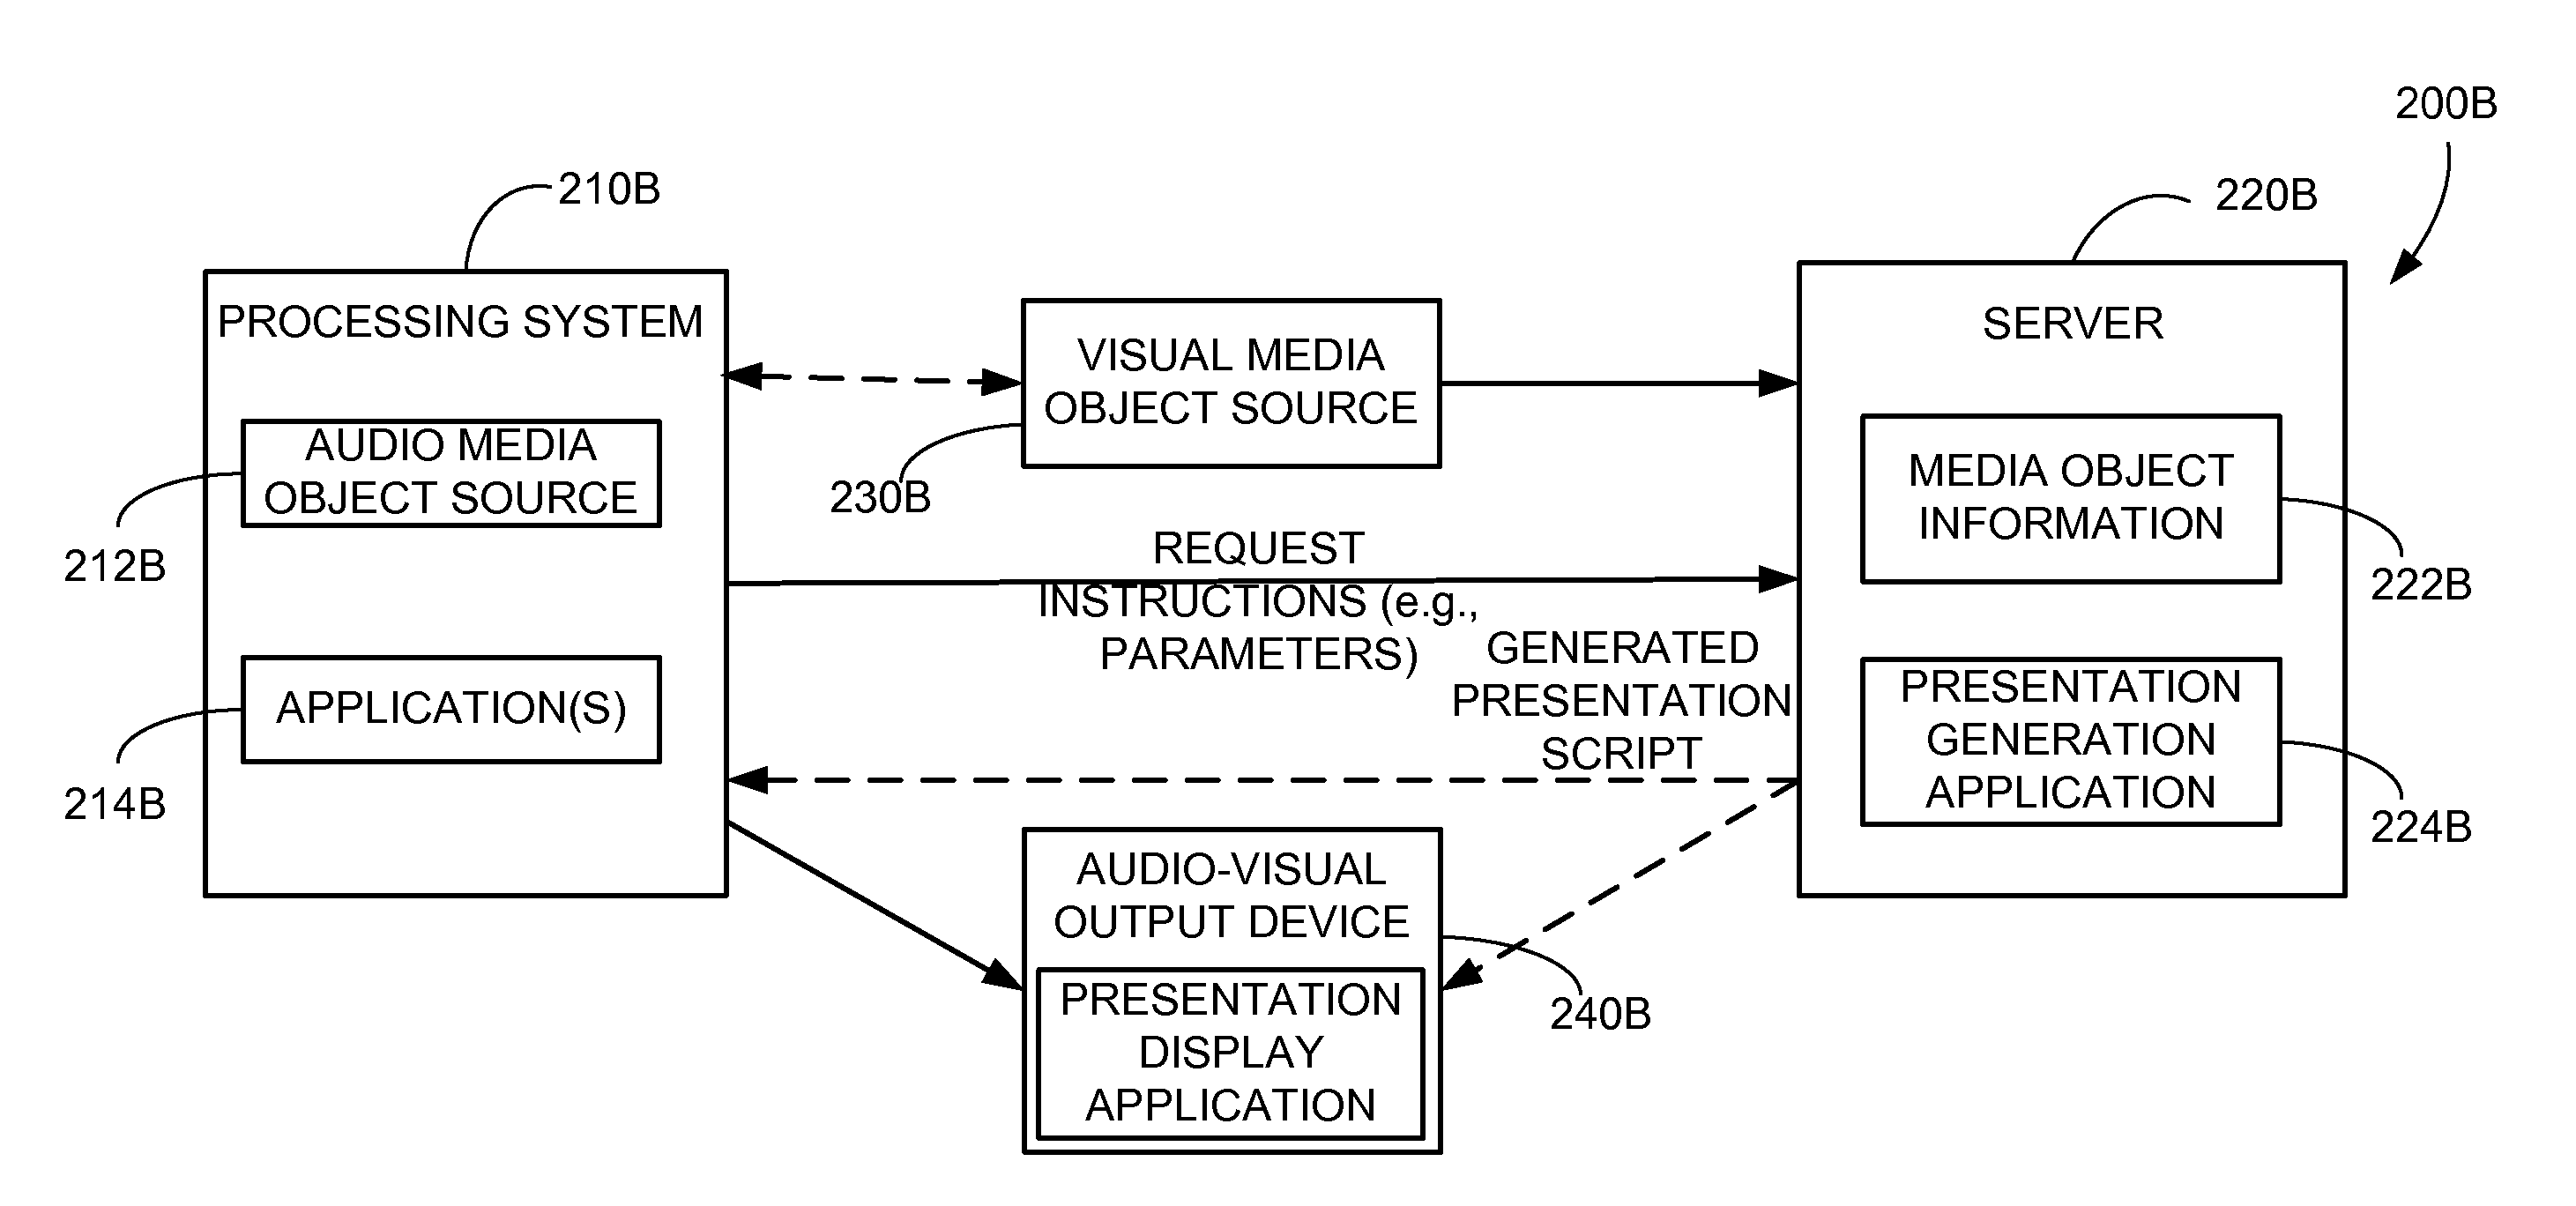 Systems, methods, and apparatus for generating an audio-visual presentation using characteristics of audio, visual and symbolic media objects